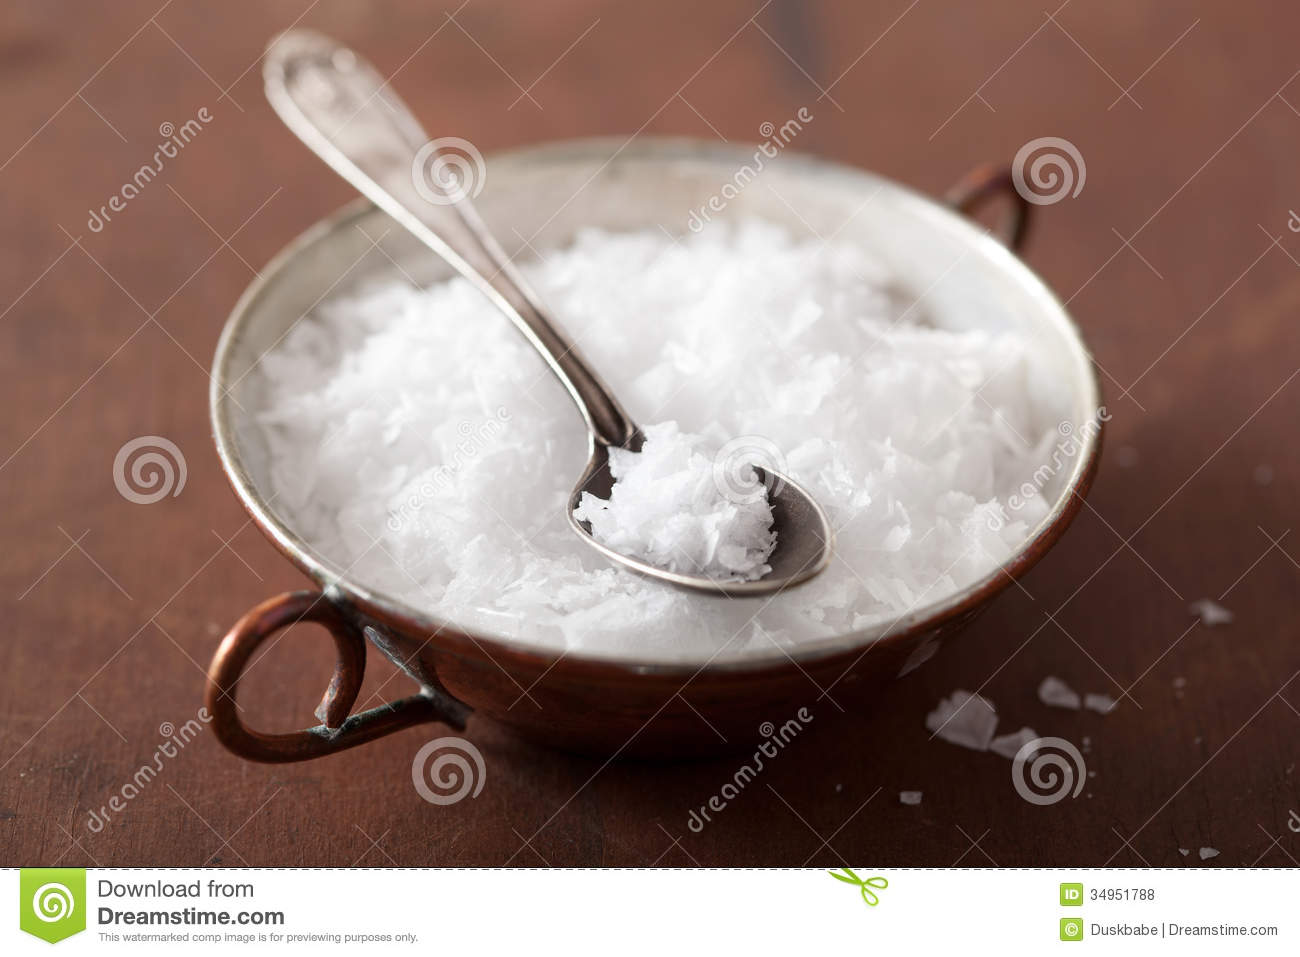 Sea Salt In Vintage Bowl And Spoon Royalty Free Stock Photos   Image